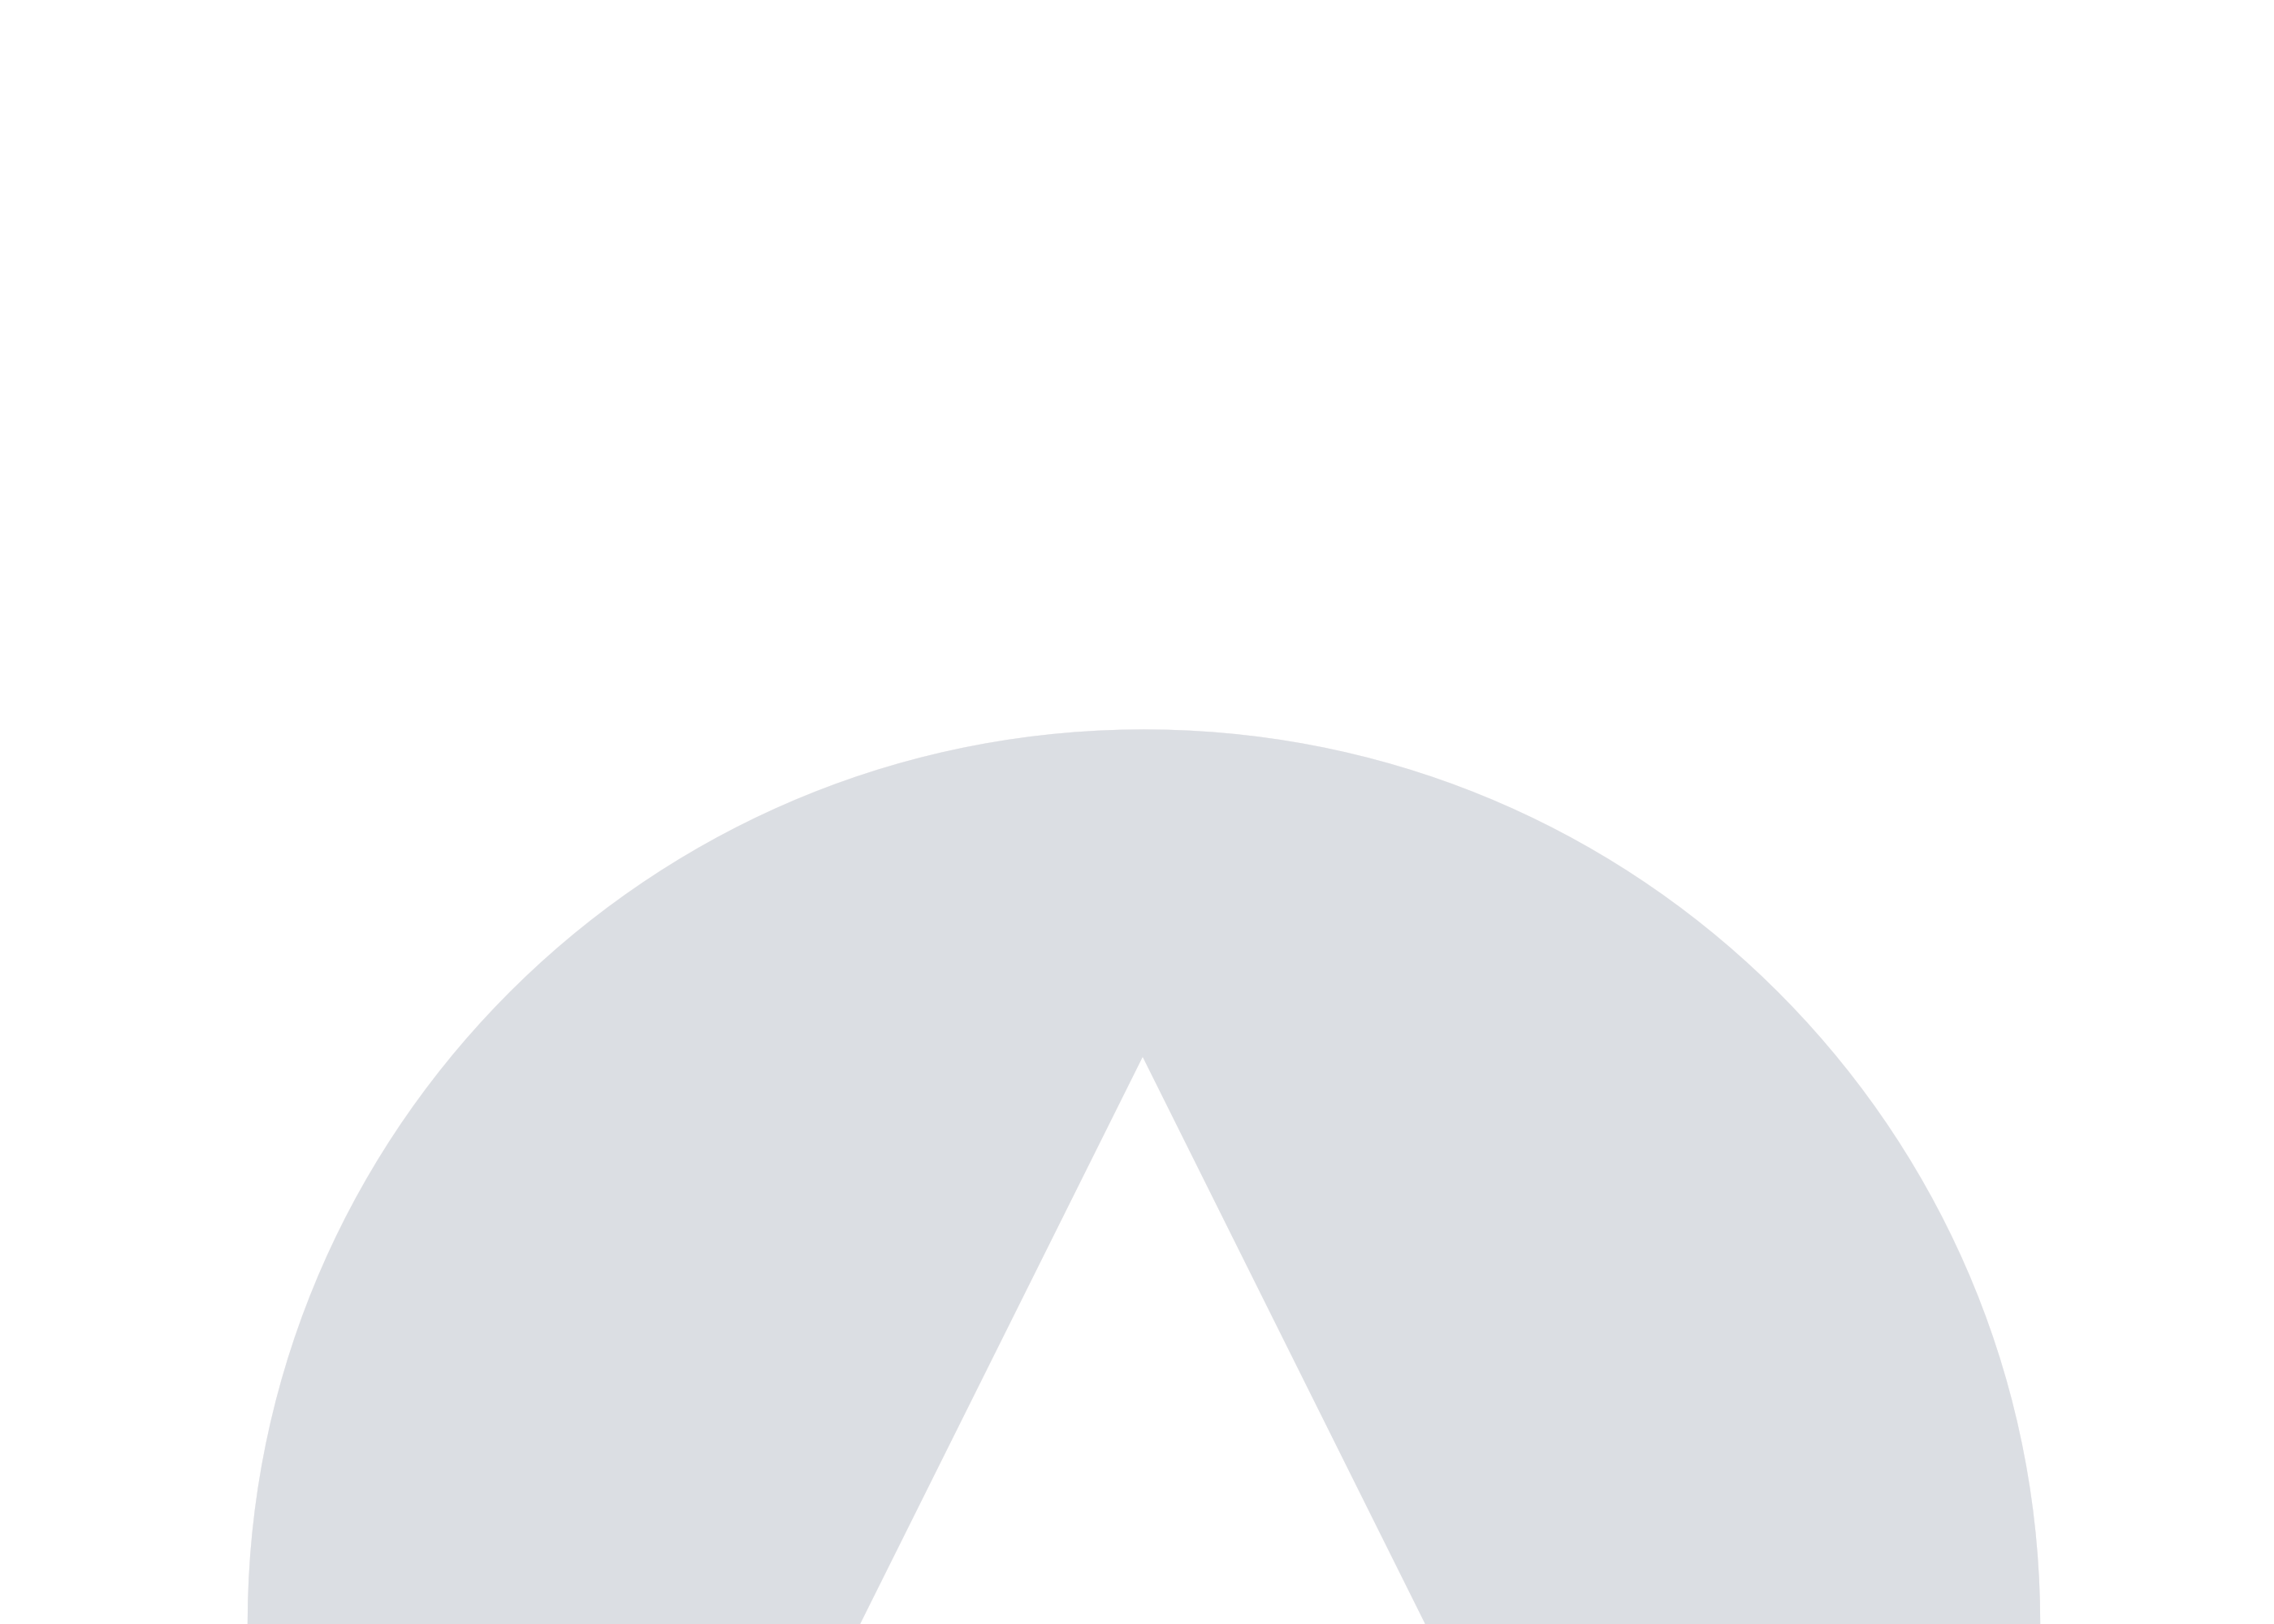 Conversations with Spirit News Archive